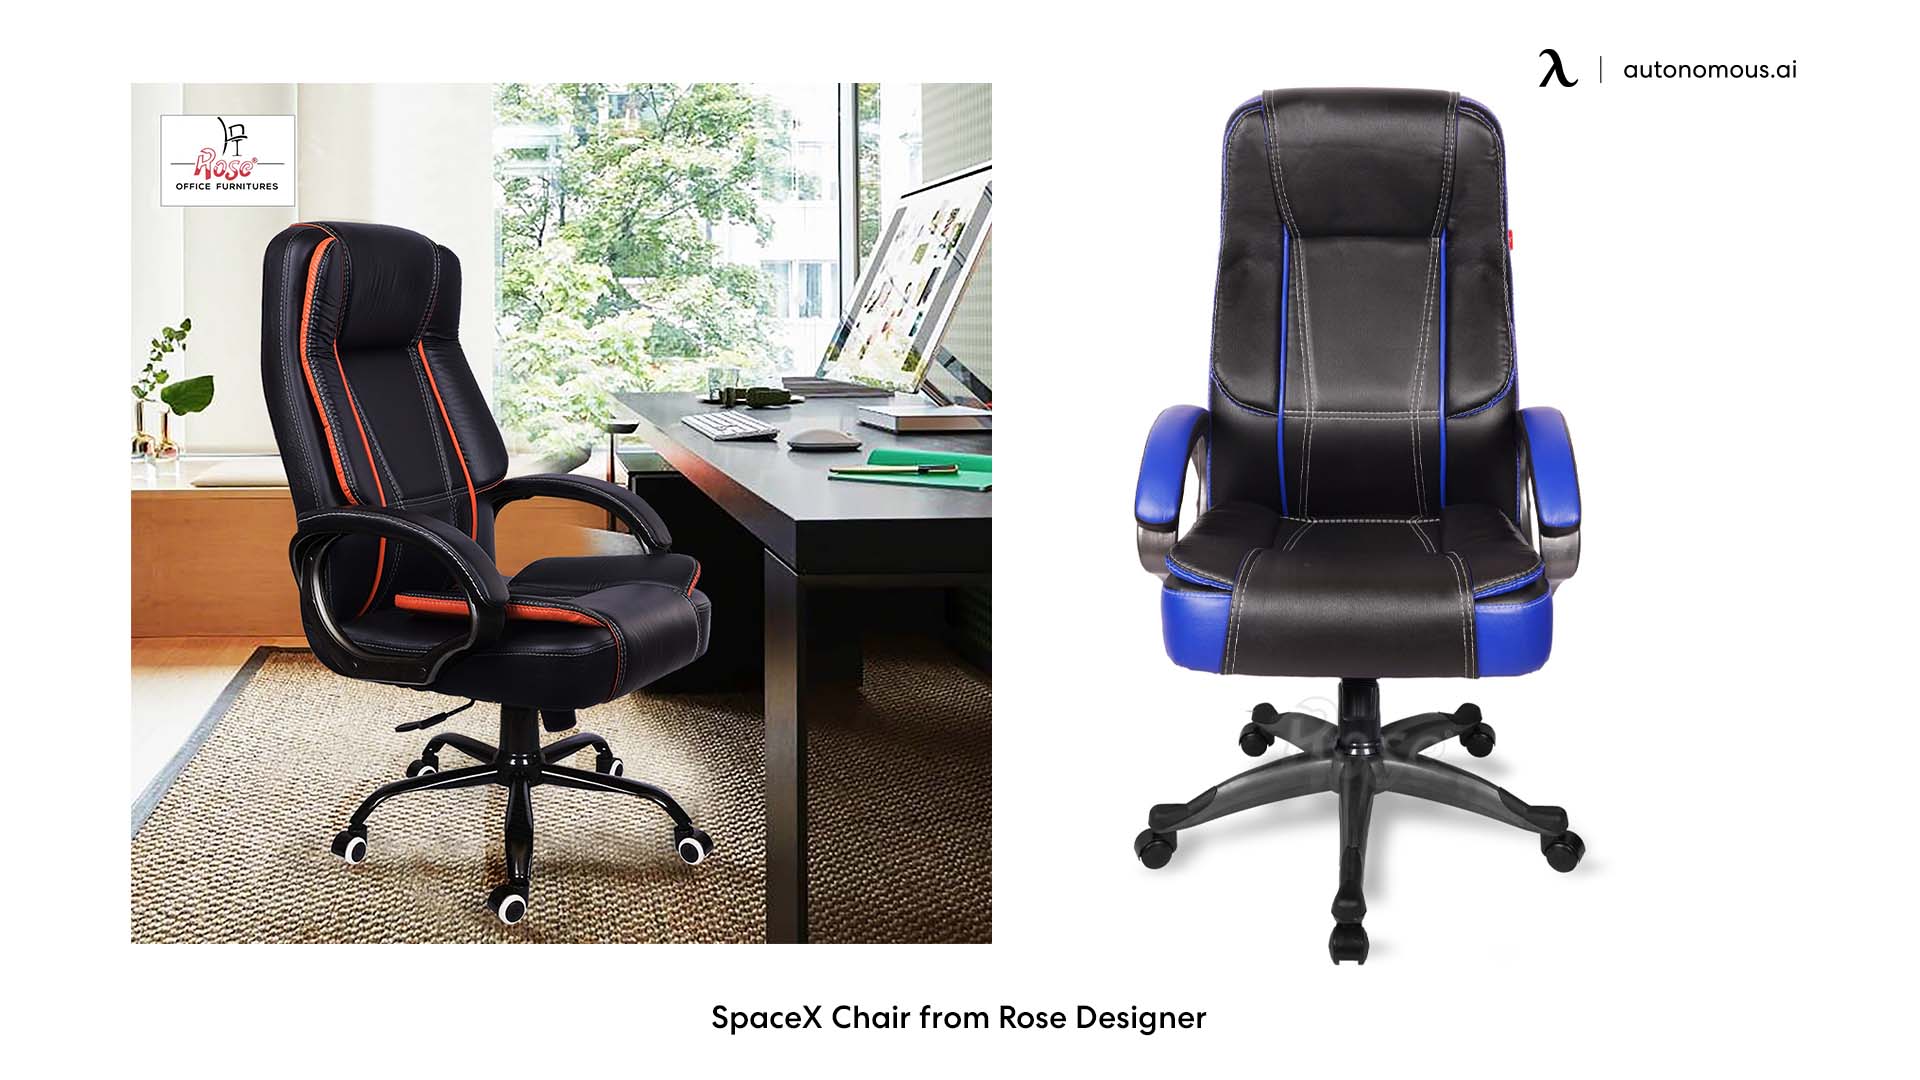 SpaceX Chair from Rose Designer best home office chair